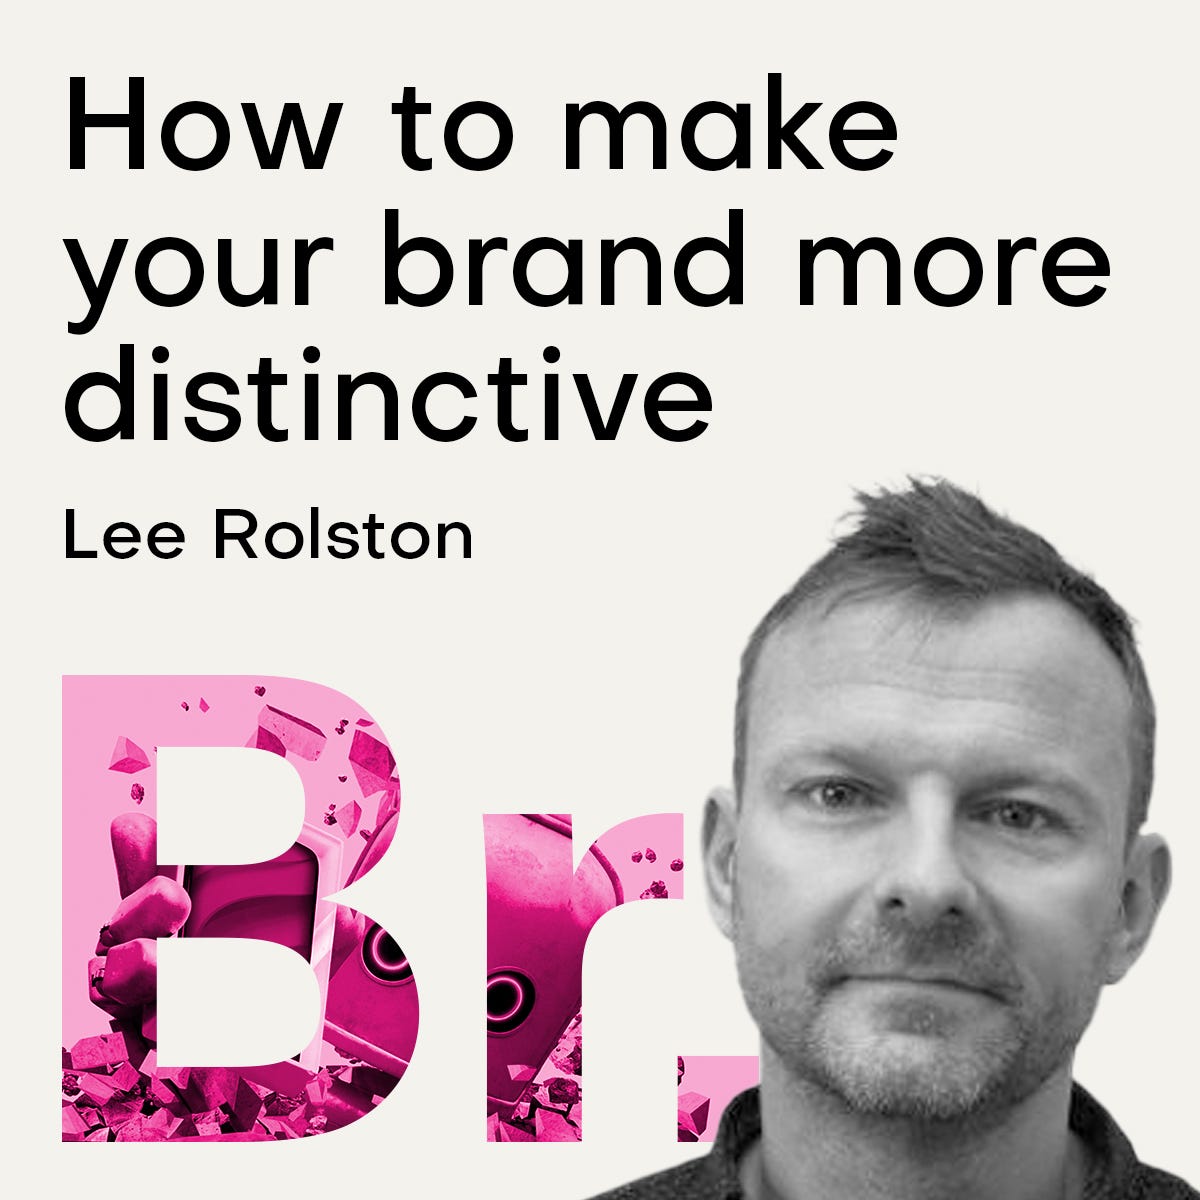 How to make your brand more distinctive with Lee Rolston.